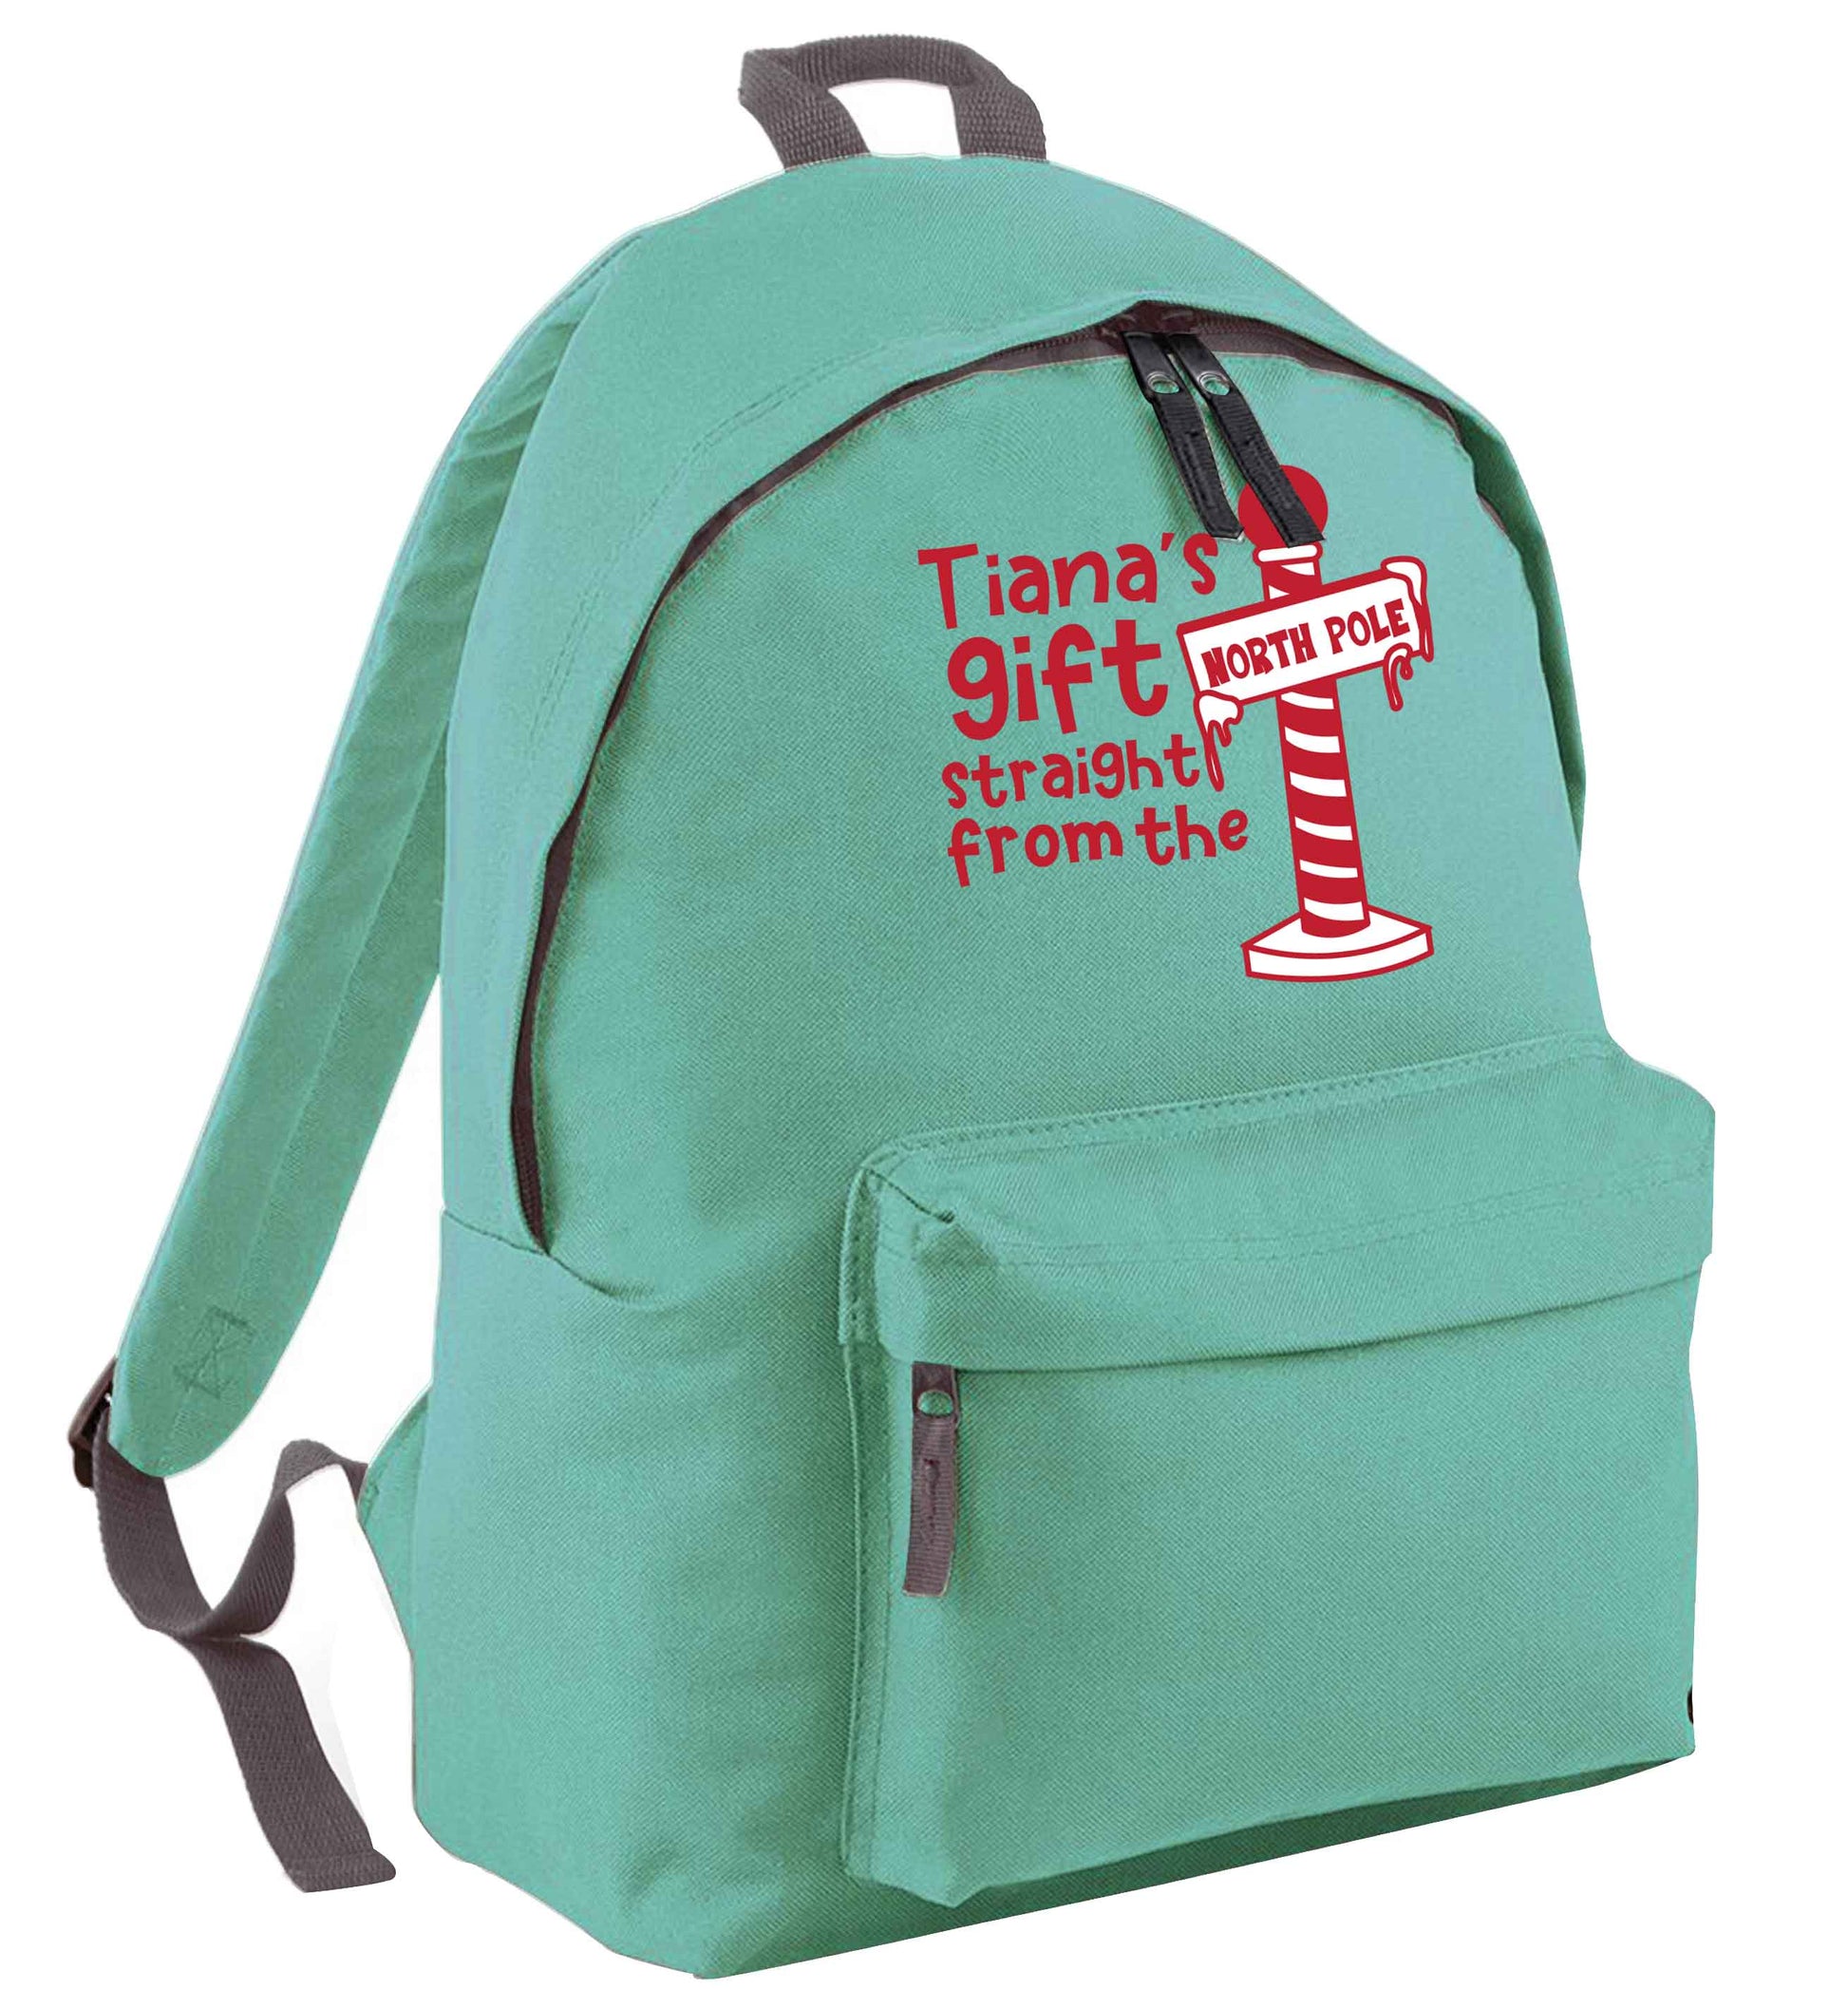 Merry Christmas mint adults backpack